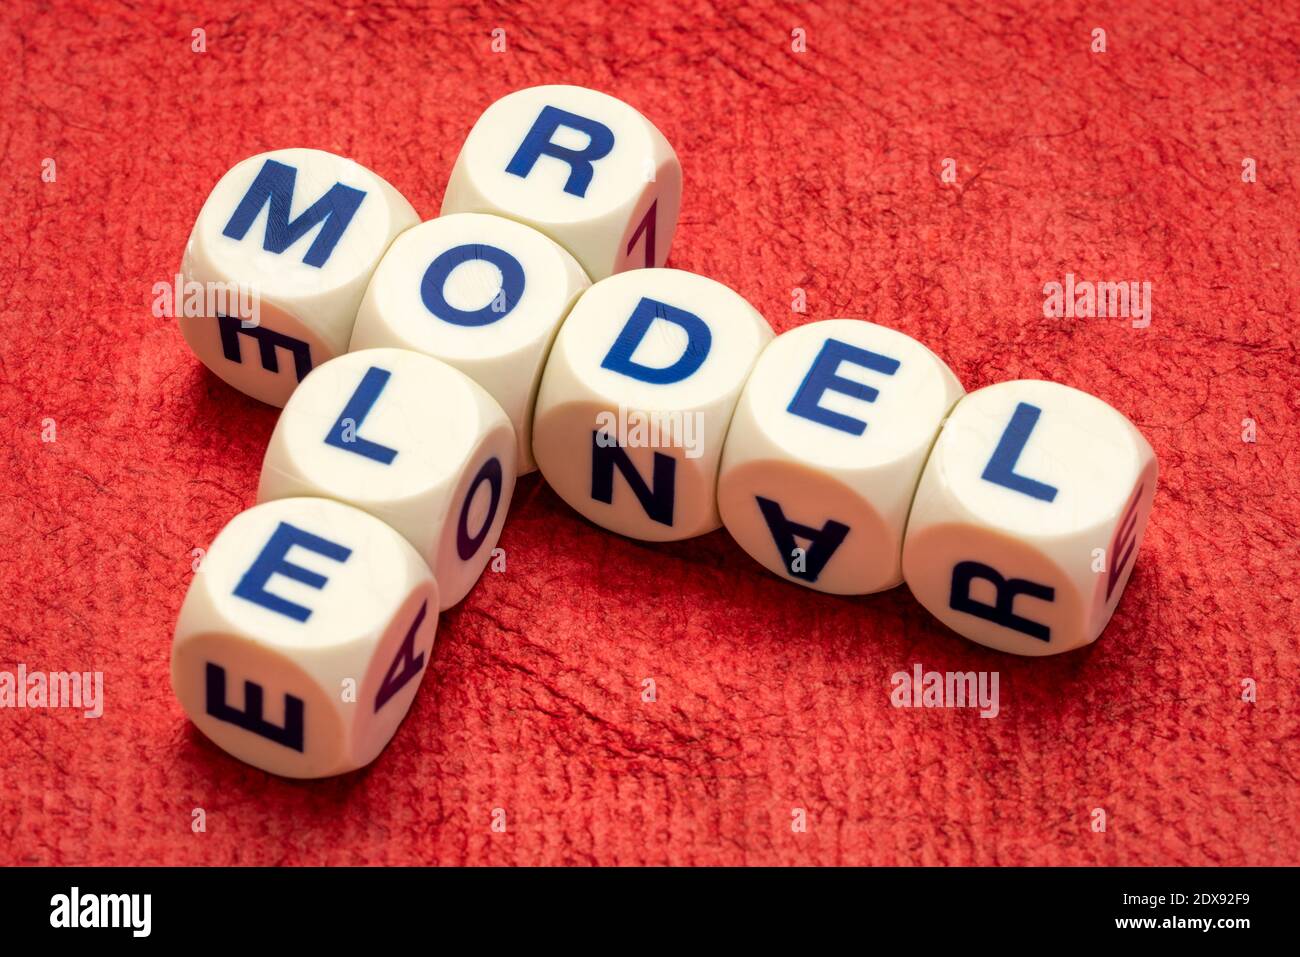 role model crossword in letter dices against textured handmade paper, inspiration and leadership concept Stock Photo